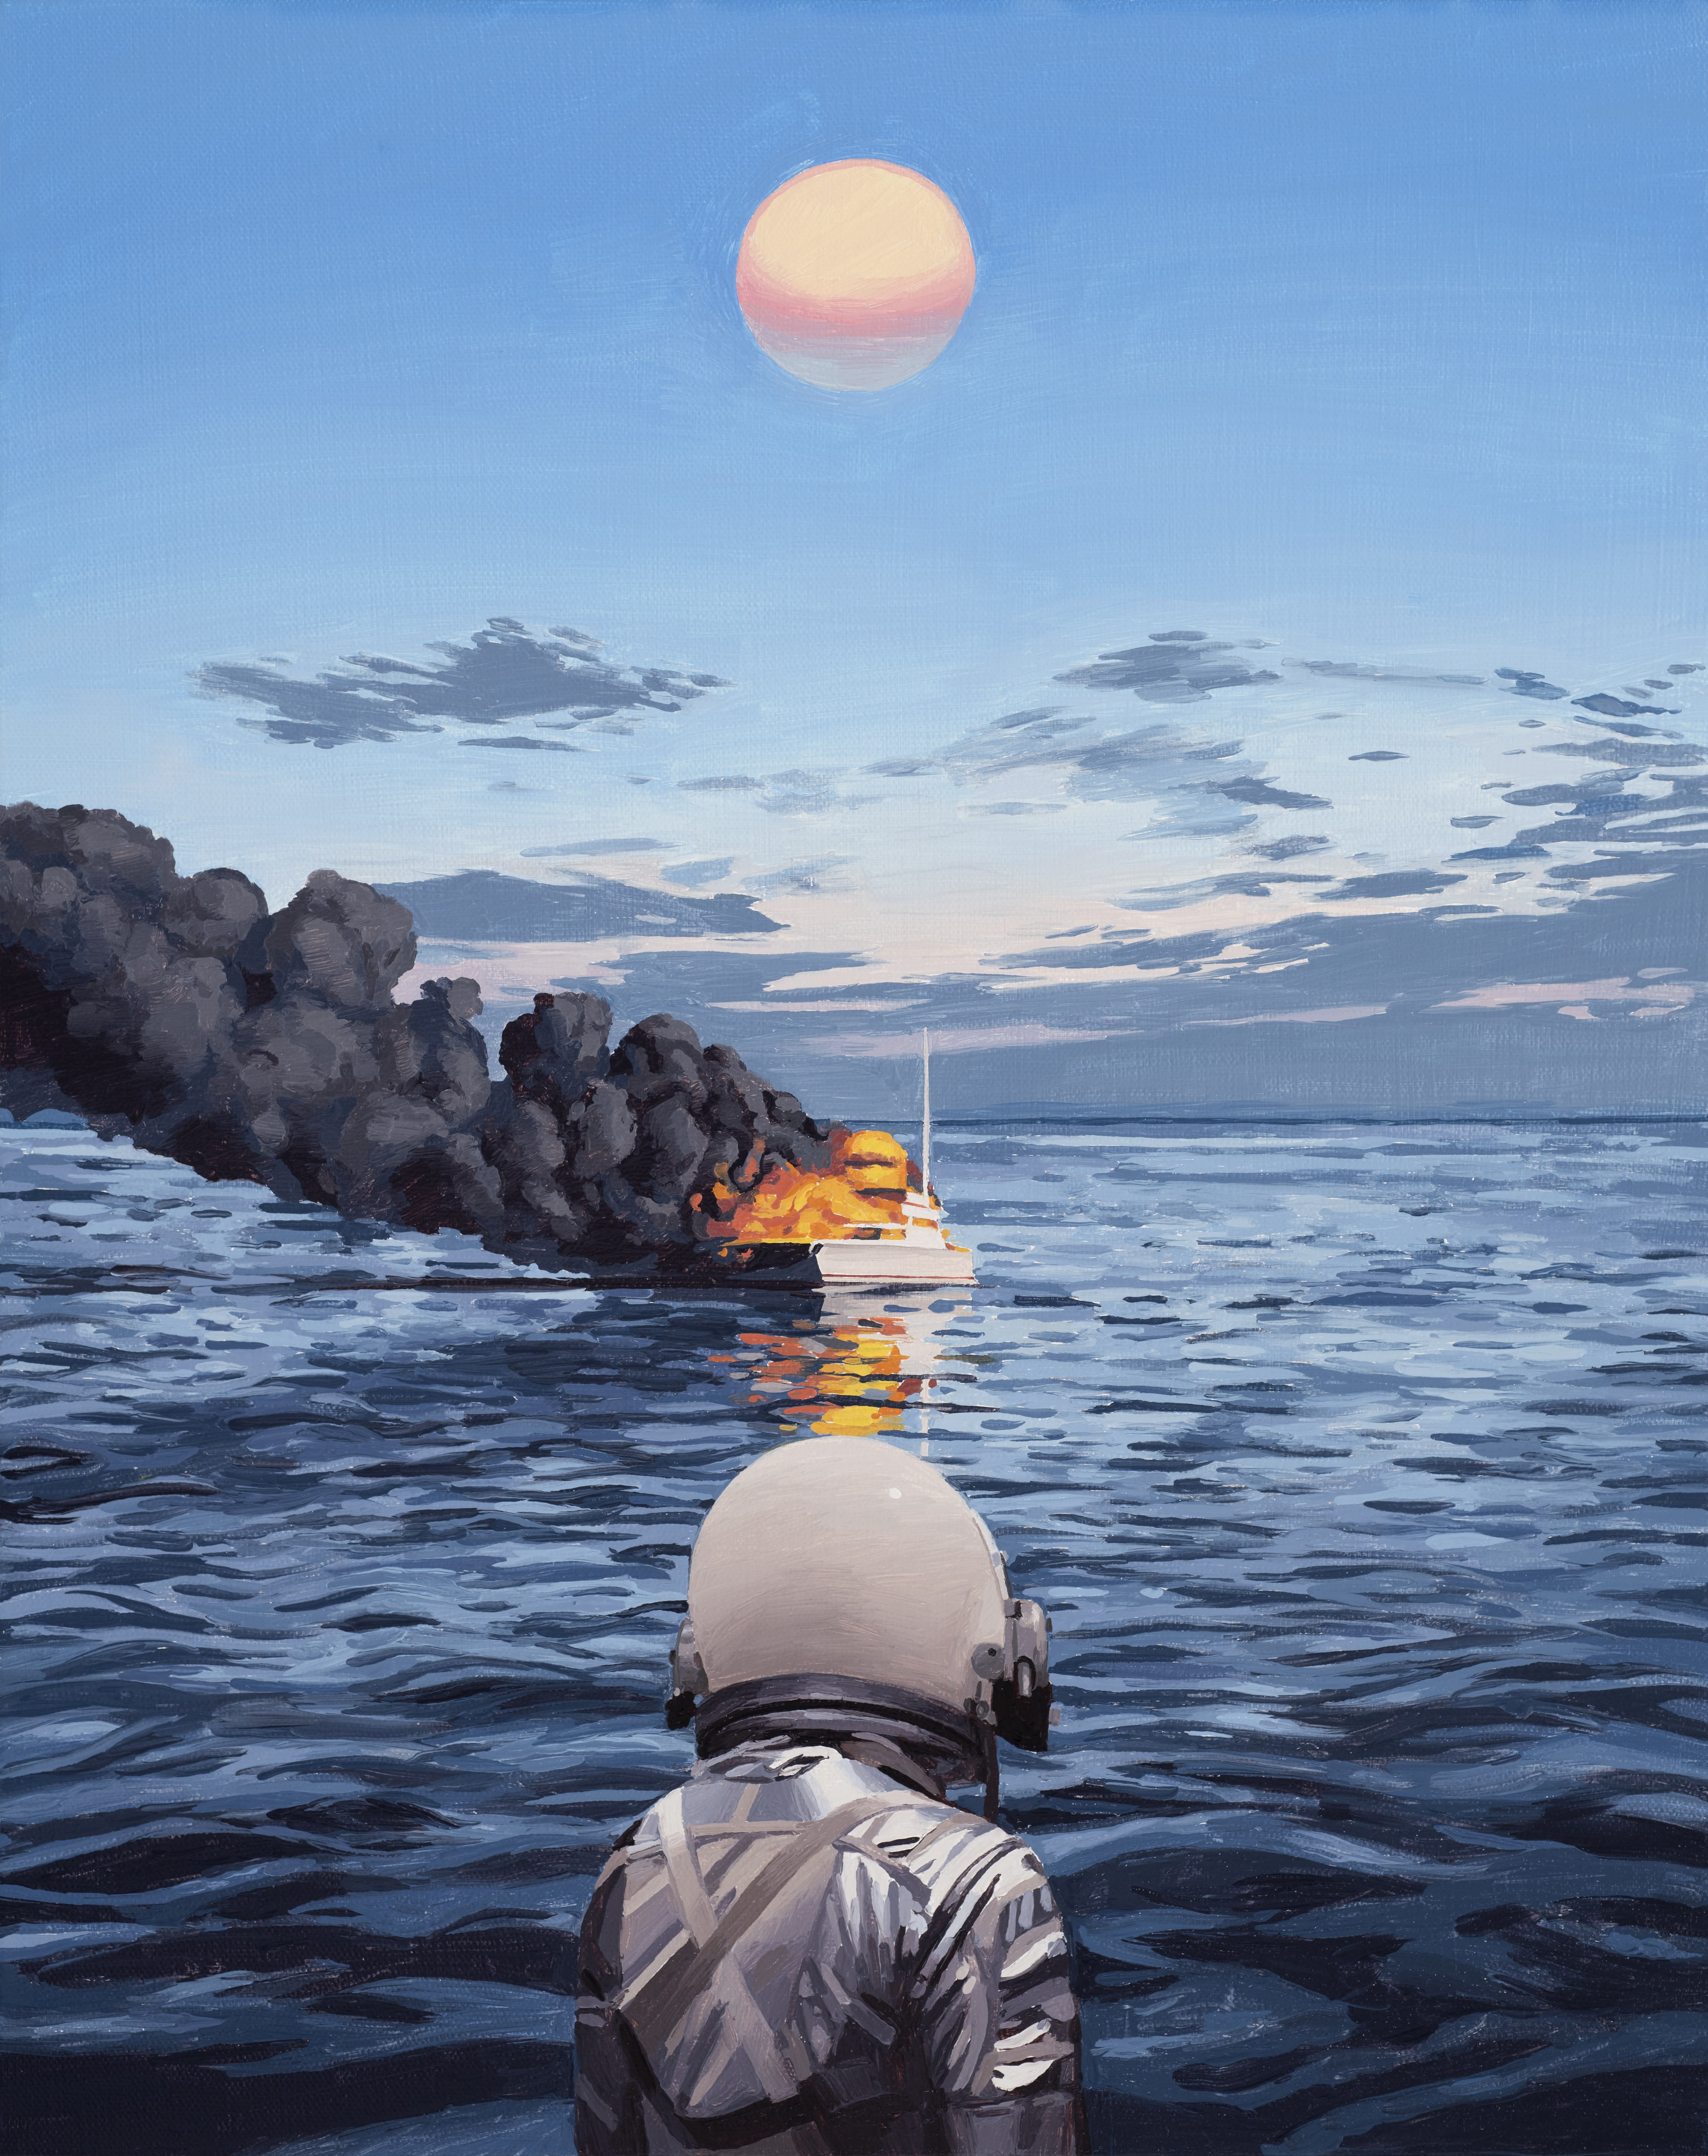 painting of an astronaut looking at a raft in the water by Scott Listfield